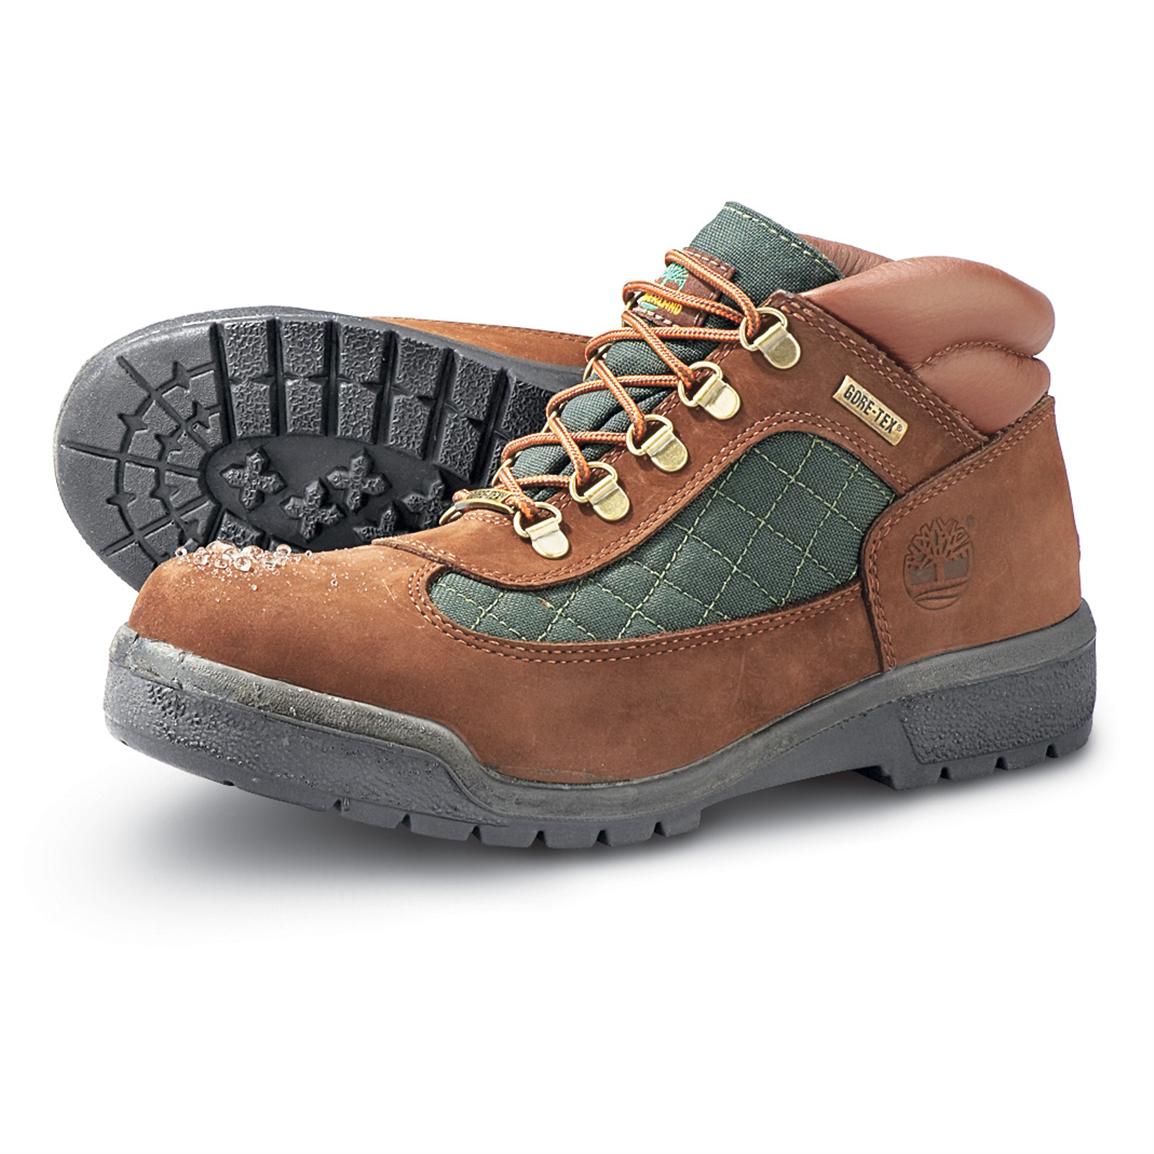 Men's Timberland® GORE-TEX® Field Boots, Brown / Green - 103789, Casual ...